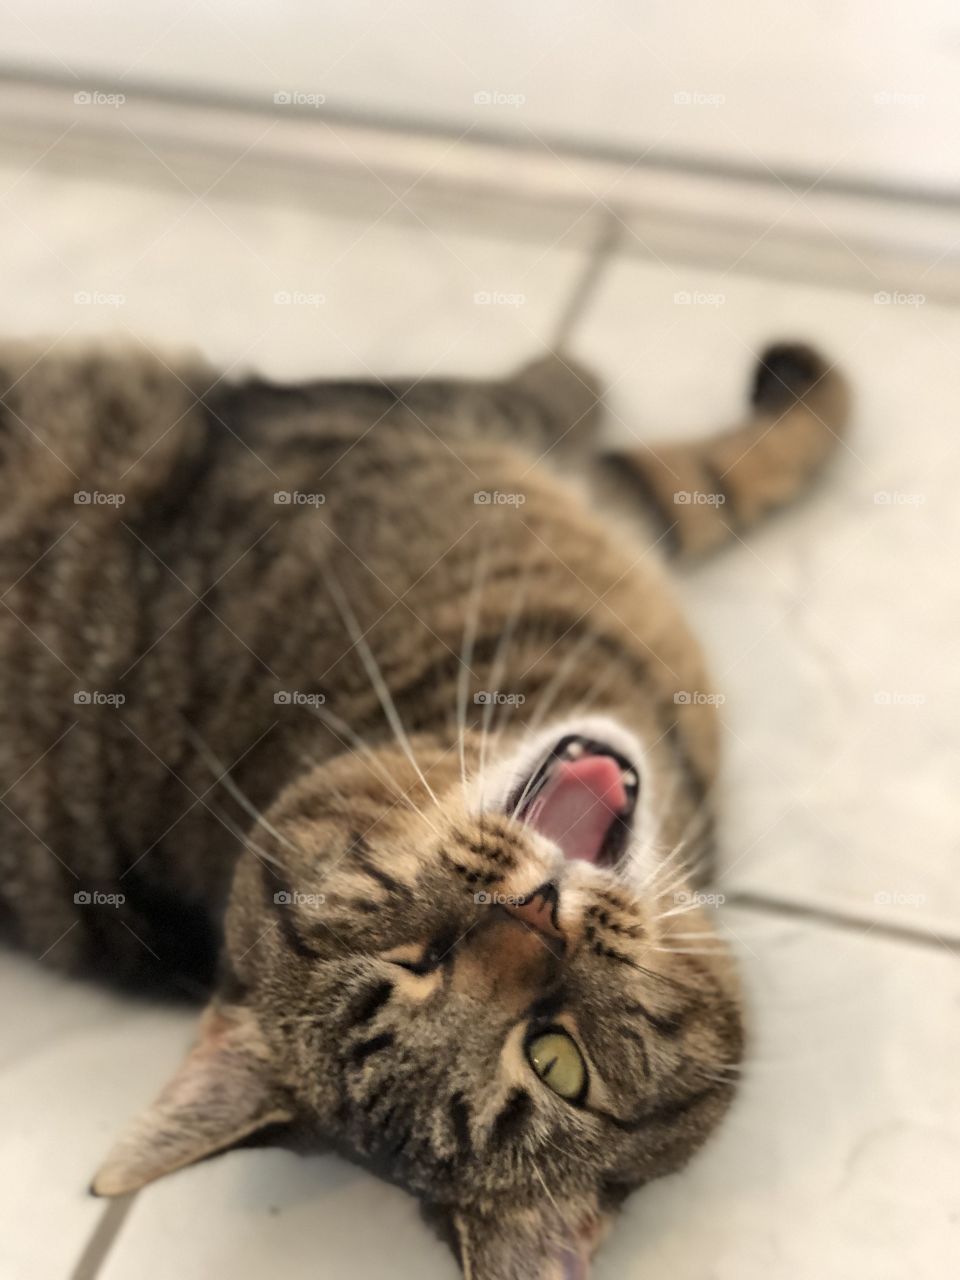 Upside down cat open mouth